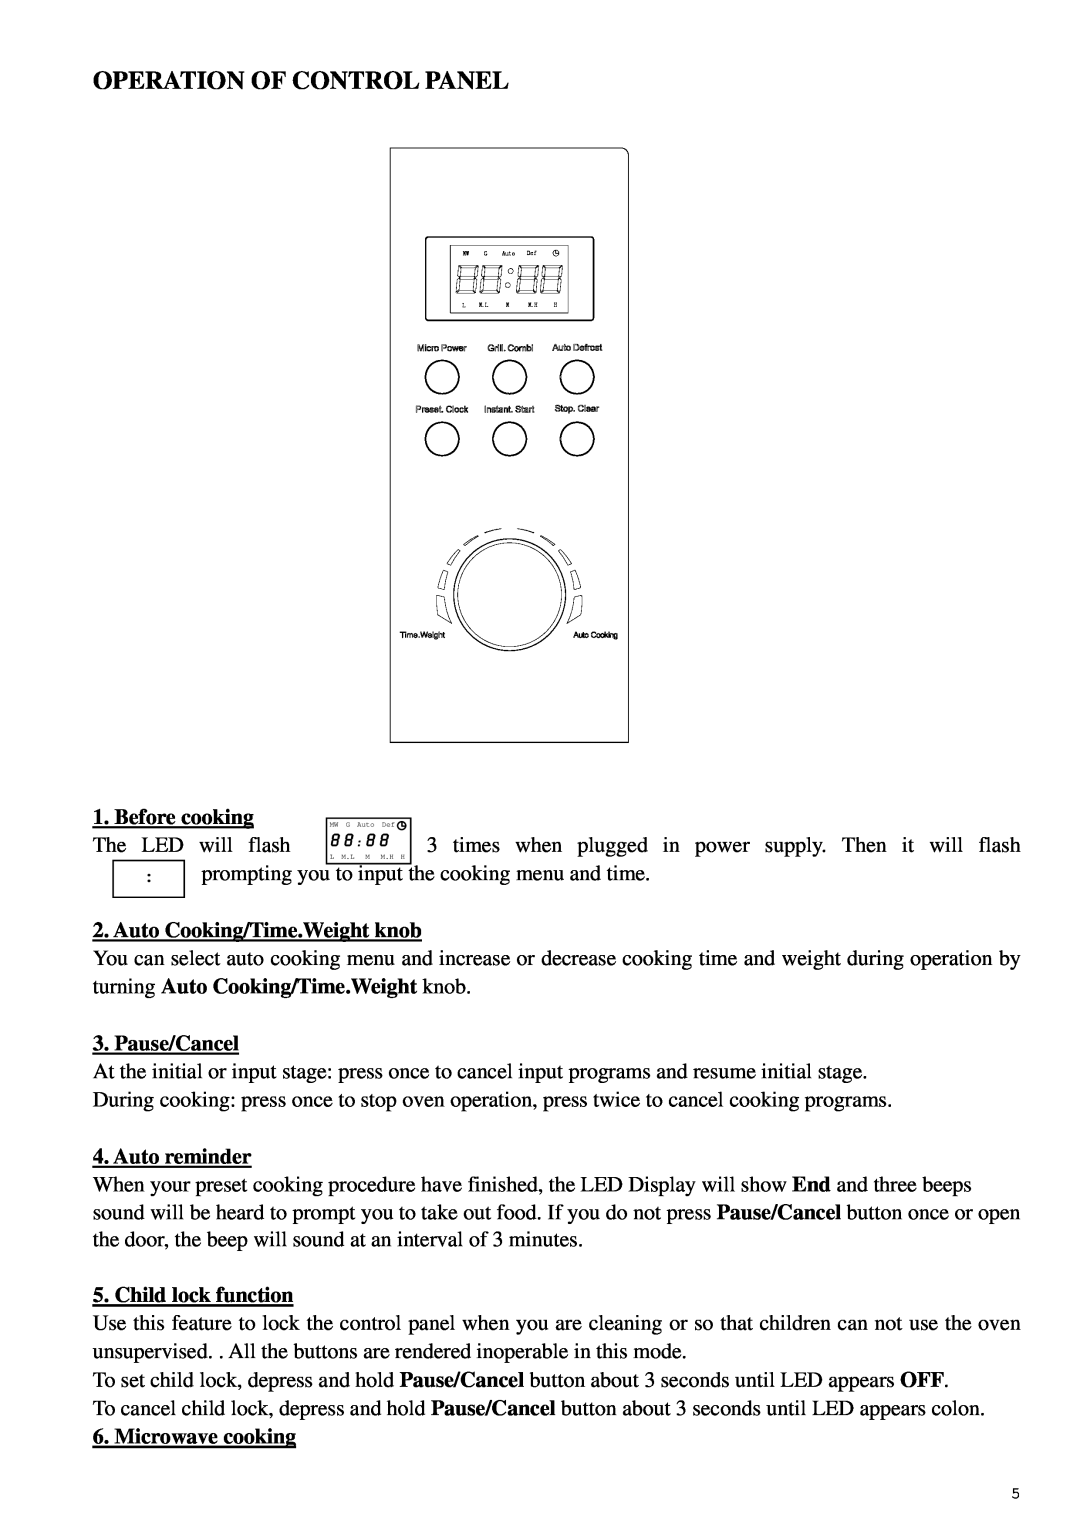 Haier HDN-2380EG Operation Of Control Panel, Before cooking, Auto Cooking/Time.Weight knob, Pause/Cancel, Auto reminder 